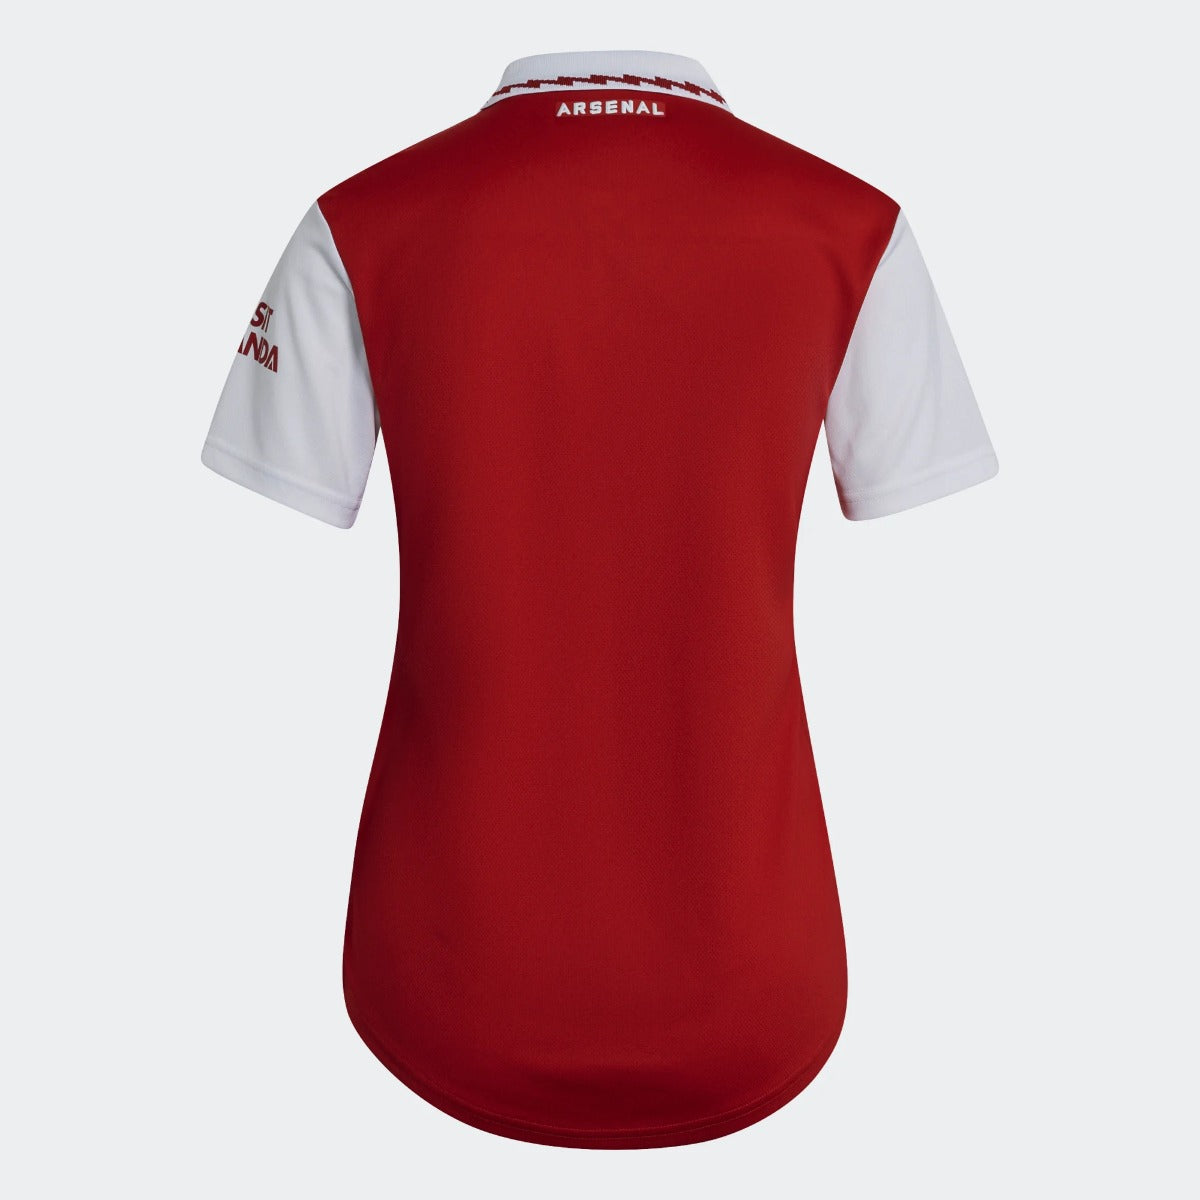 adidas 22-23 Arsenal Womens Home Jersey - Scarlet-White (Back)